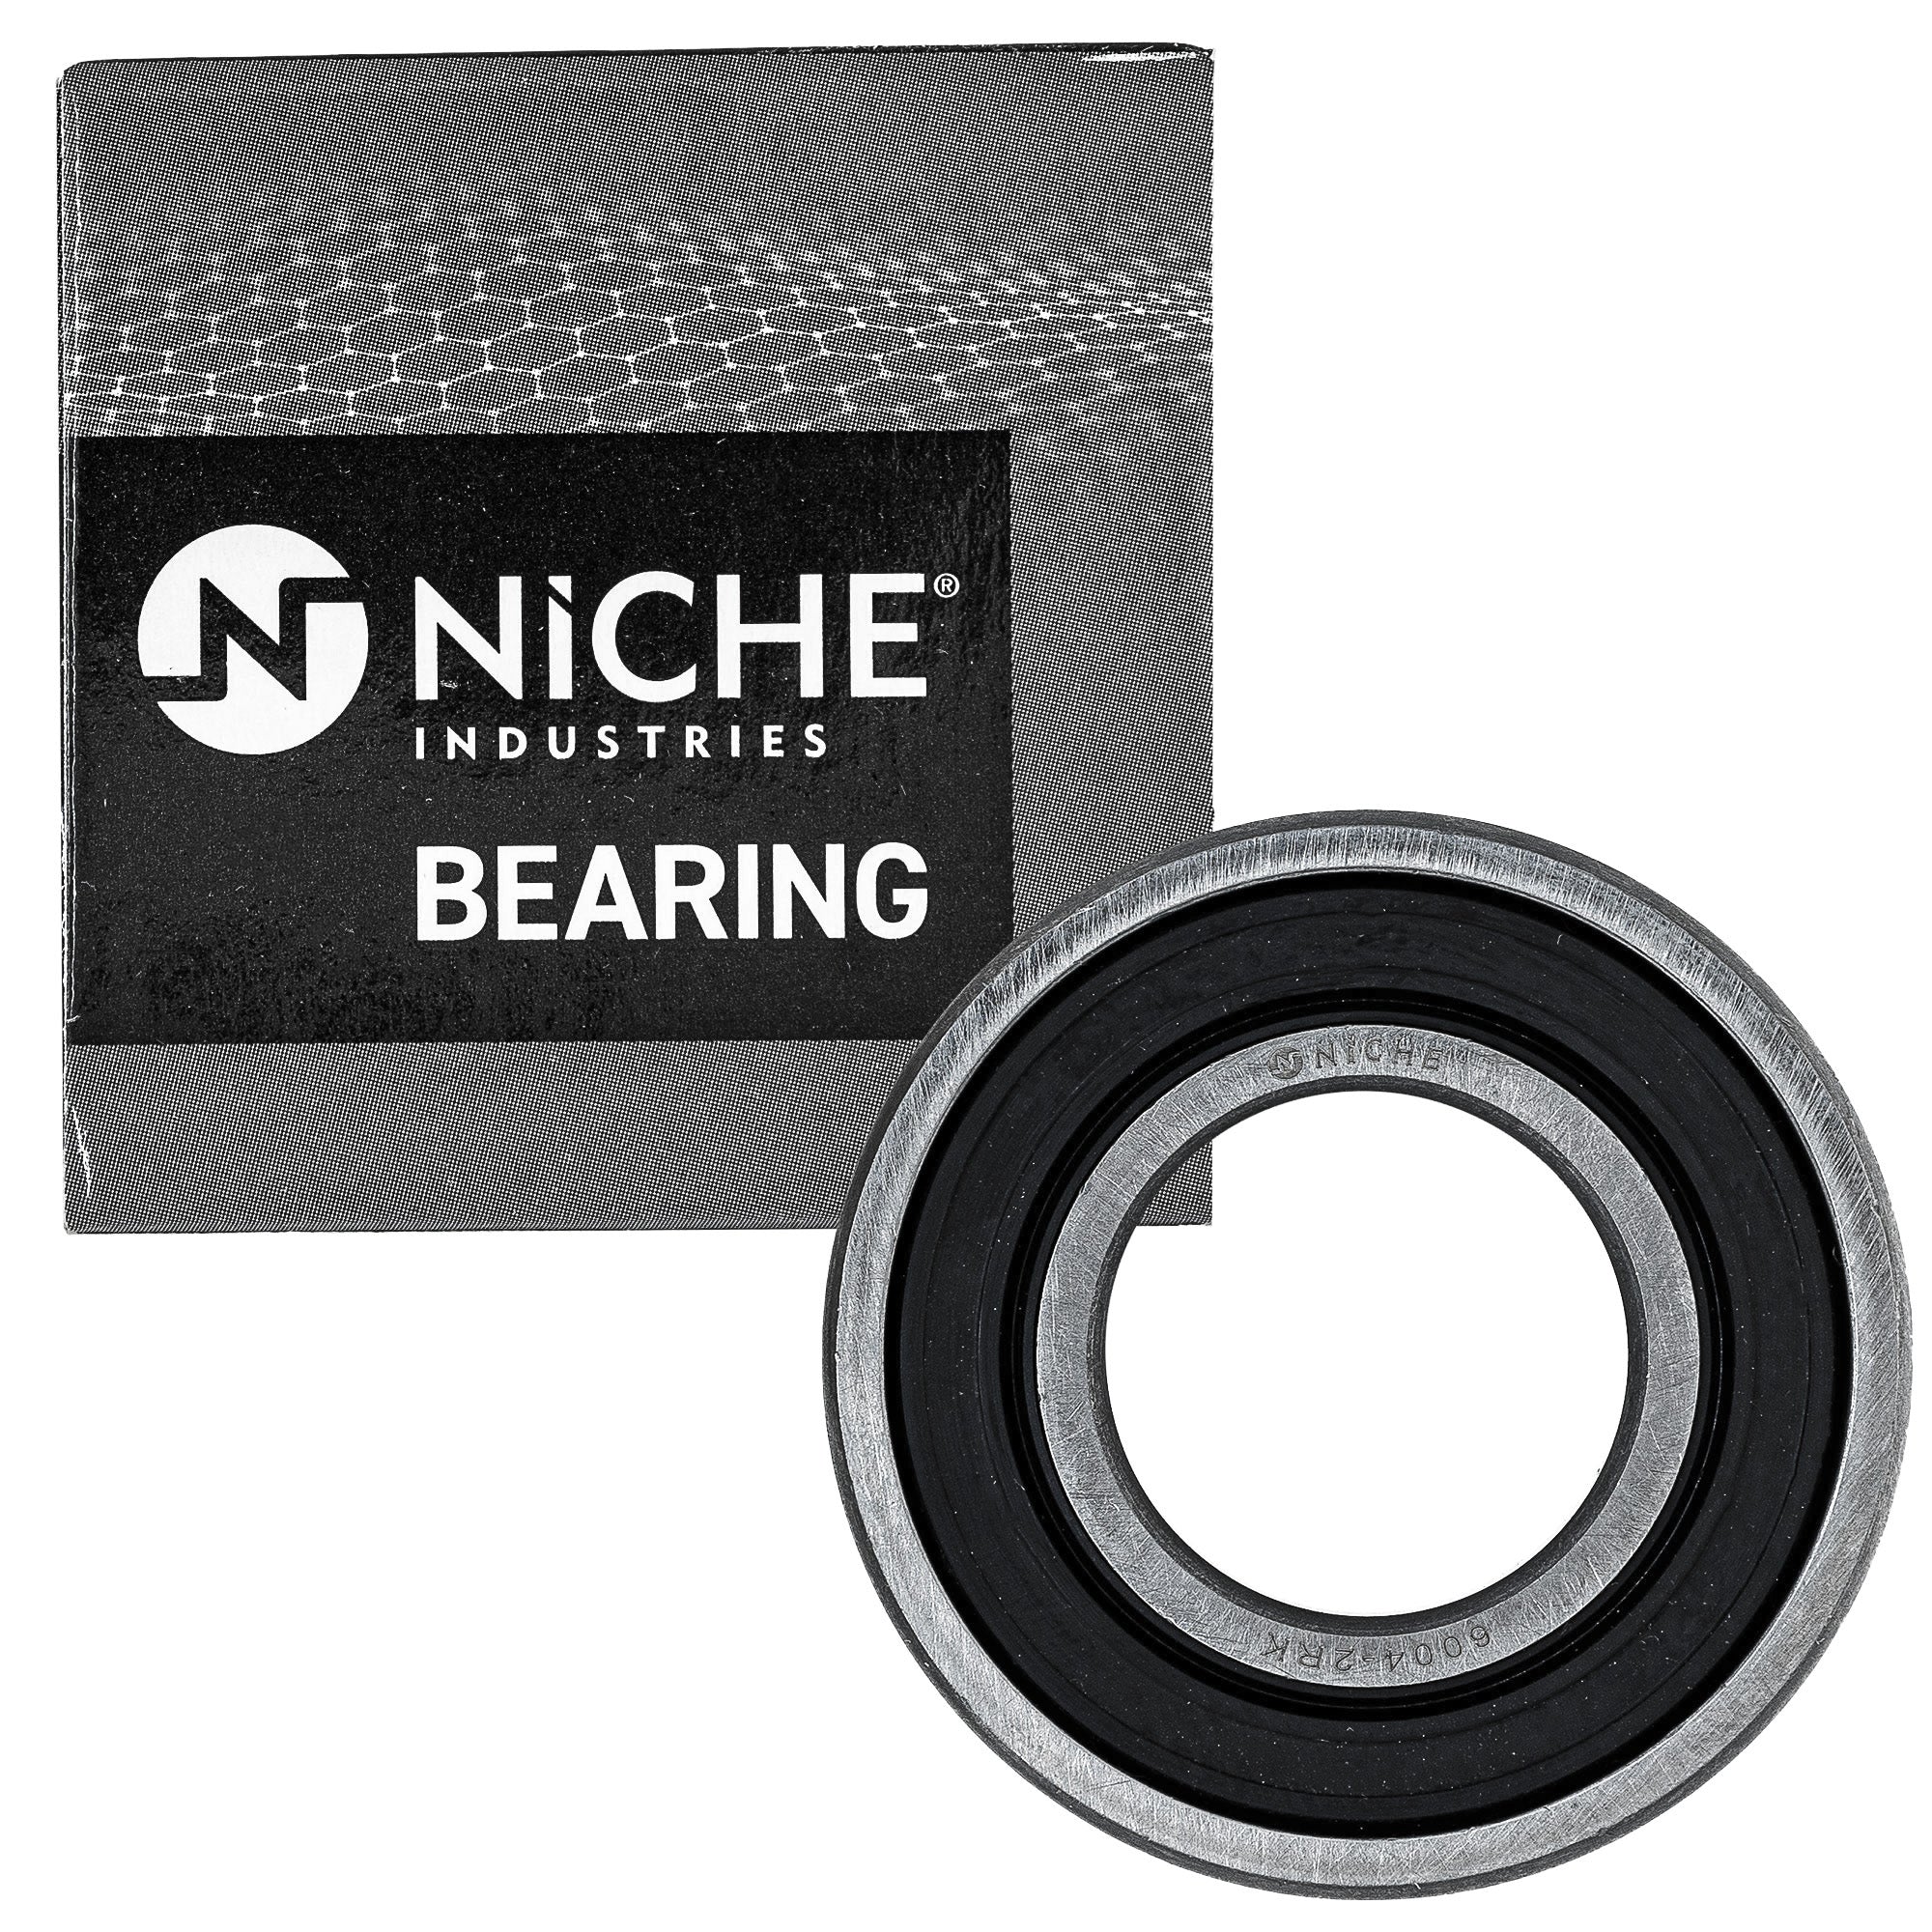 NICHE MK1009135 Wheel Bearing Seal Kit for zOTHER YZ400F YZ250WR